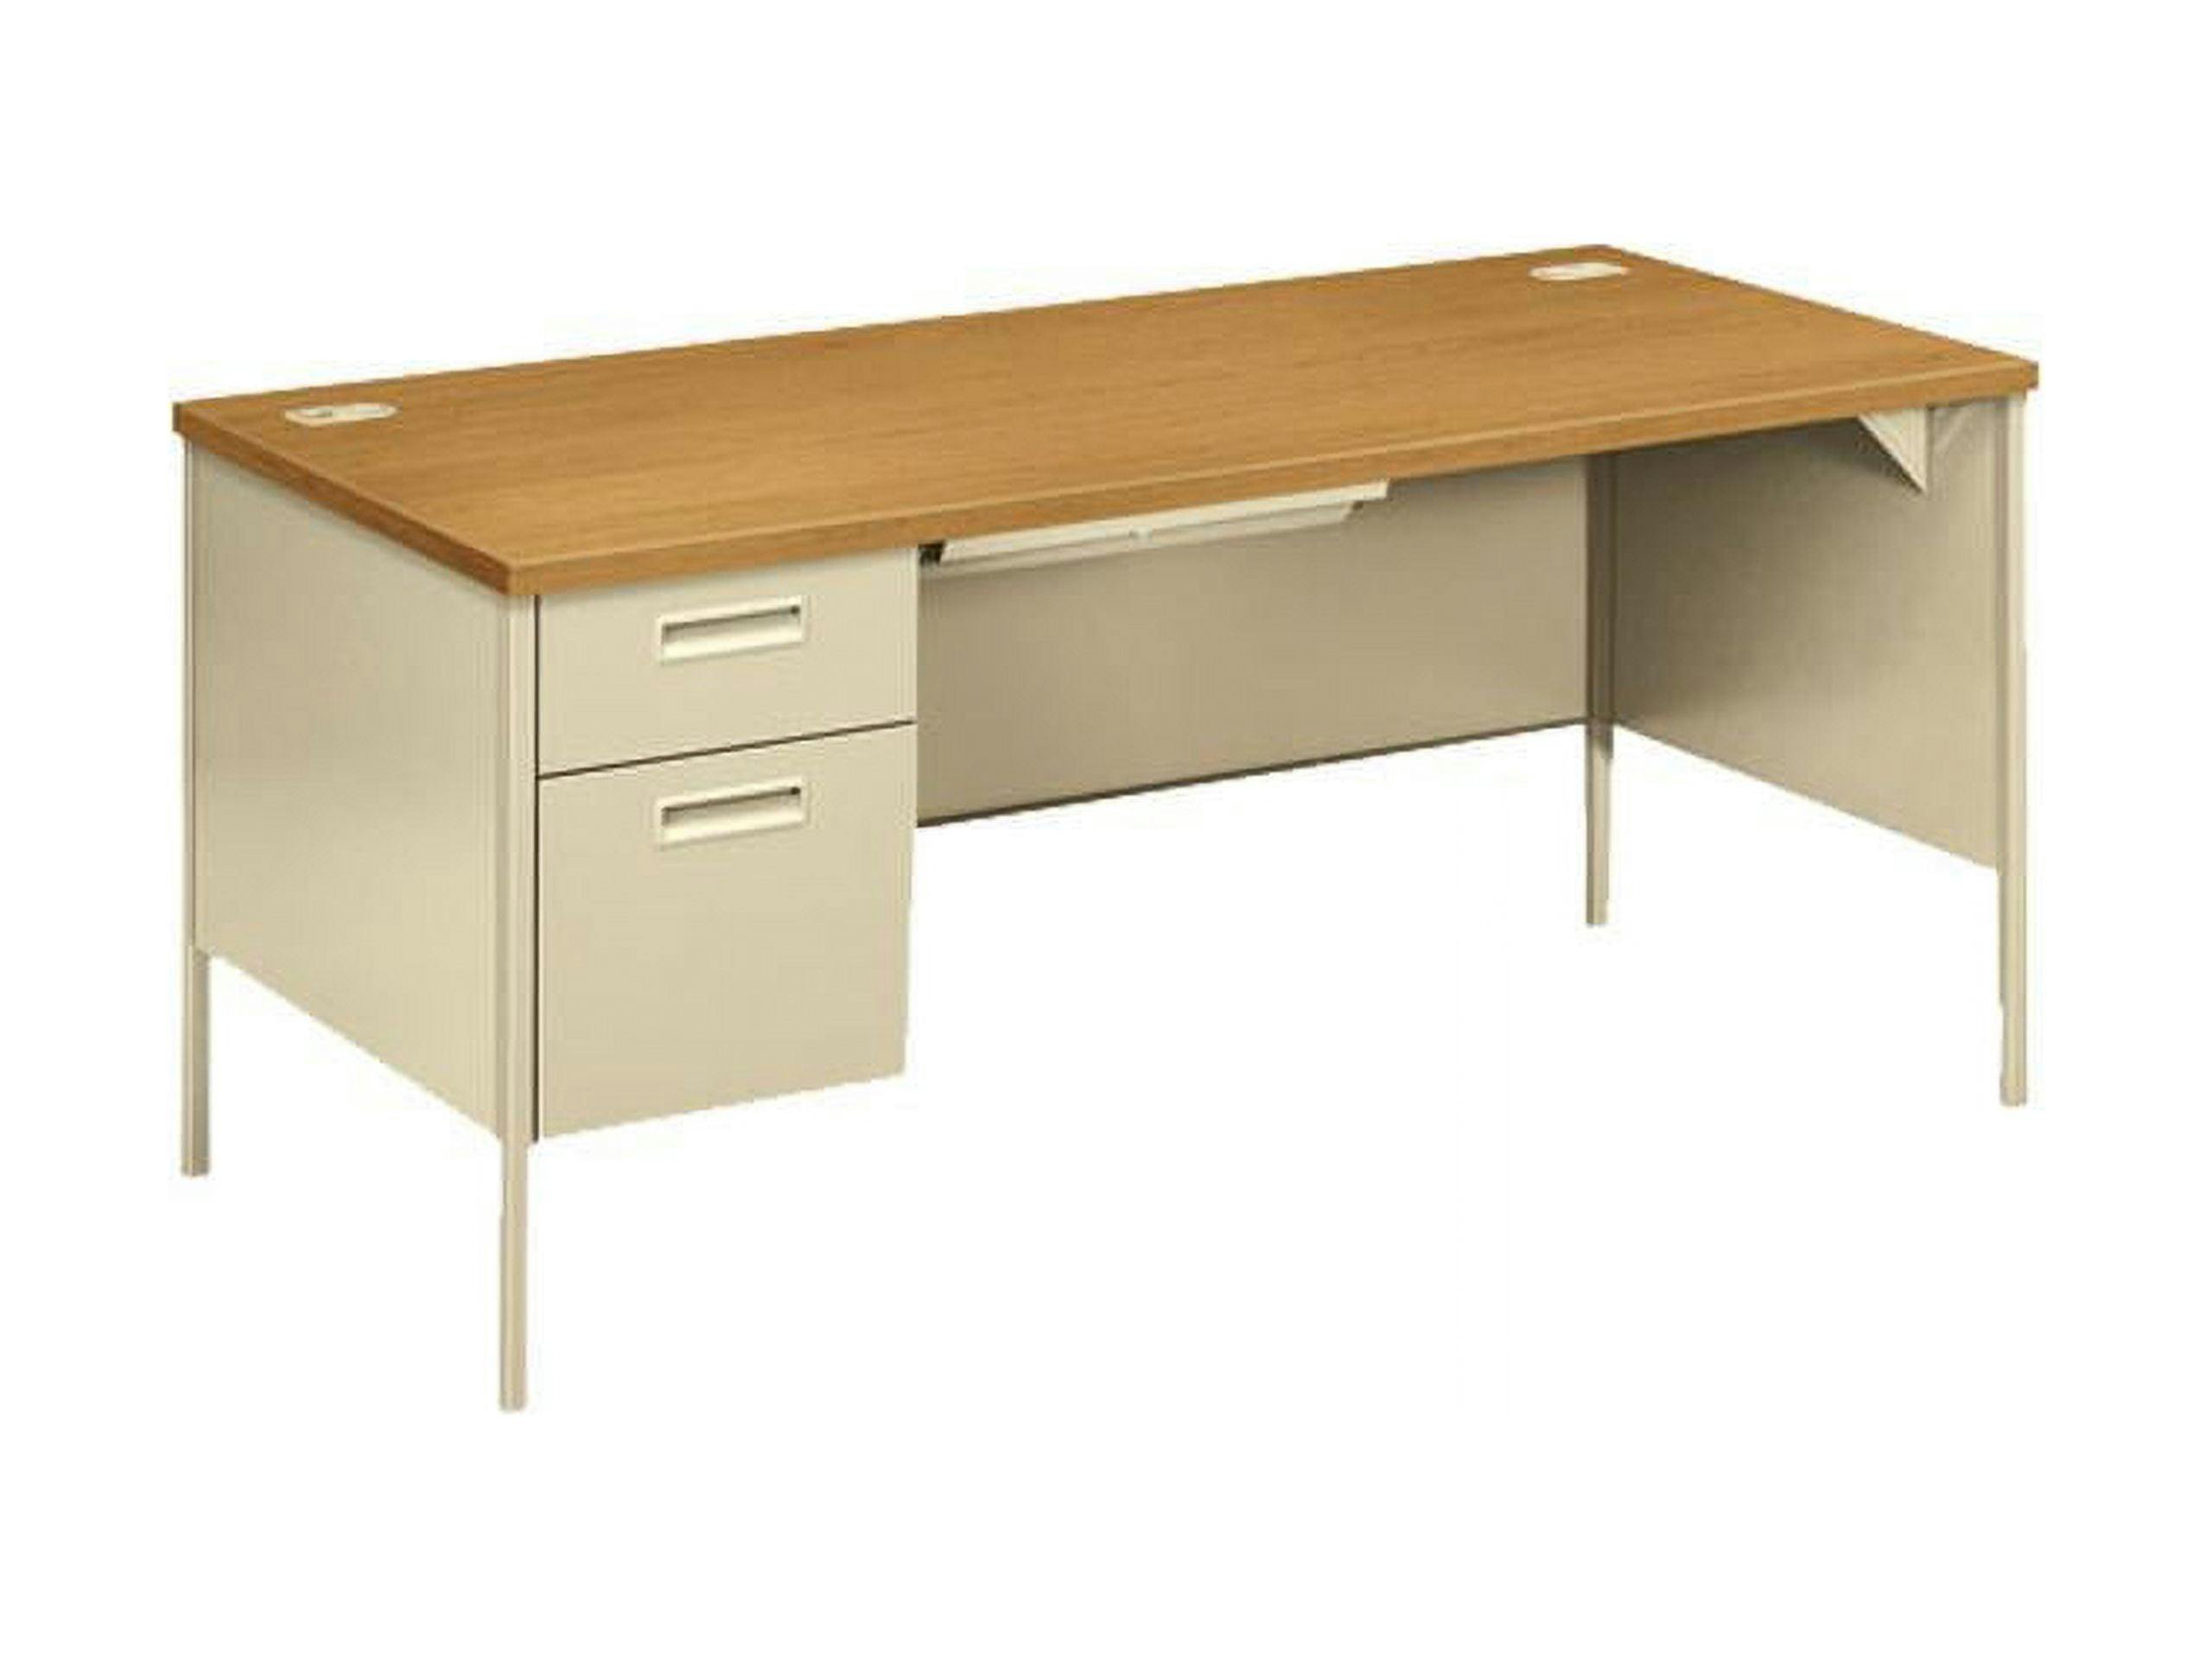 Metro Classic 66" Steel Workstation Desk with Filing Cabinet in Putty